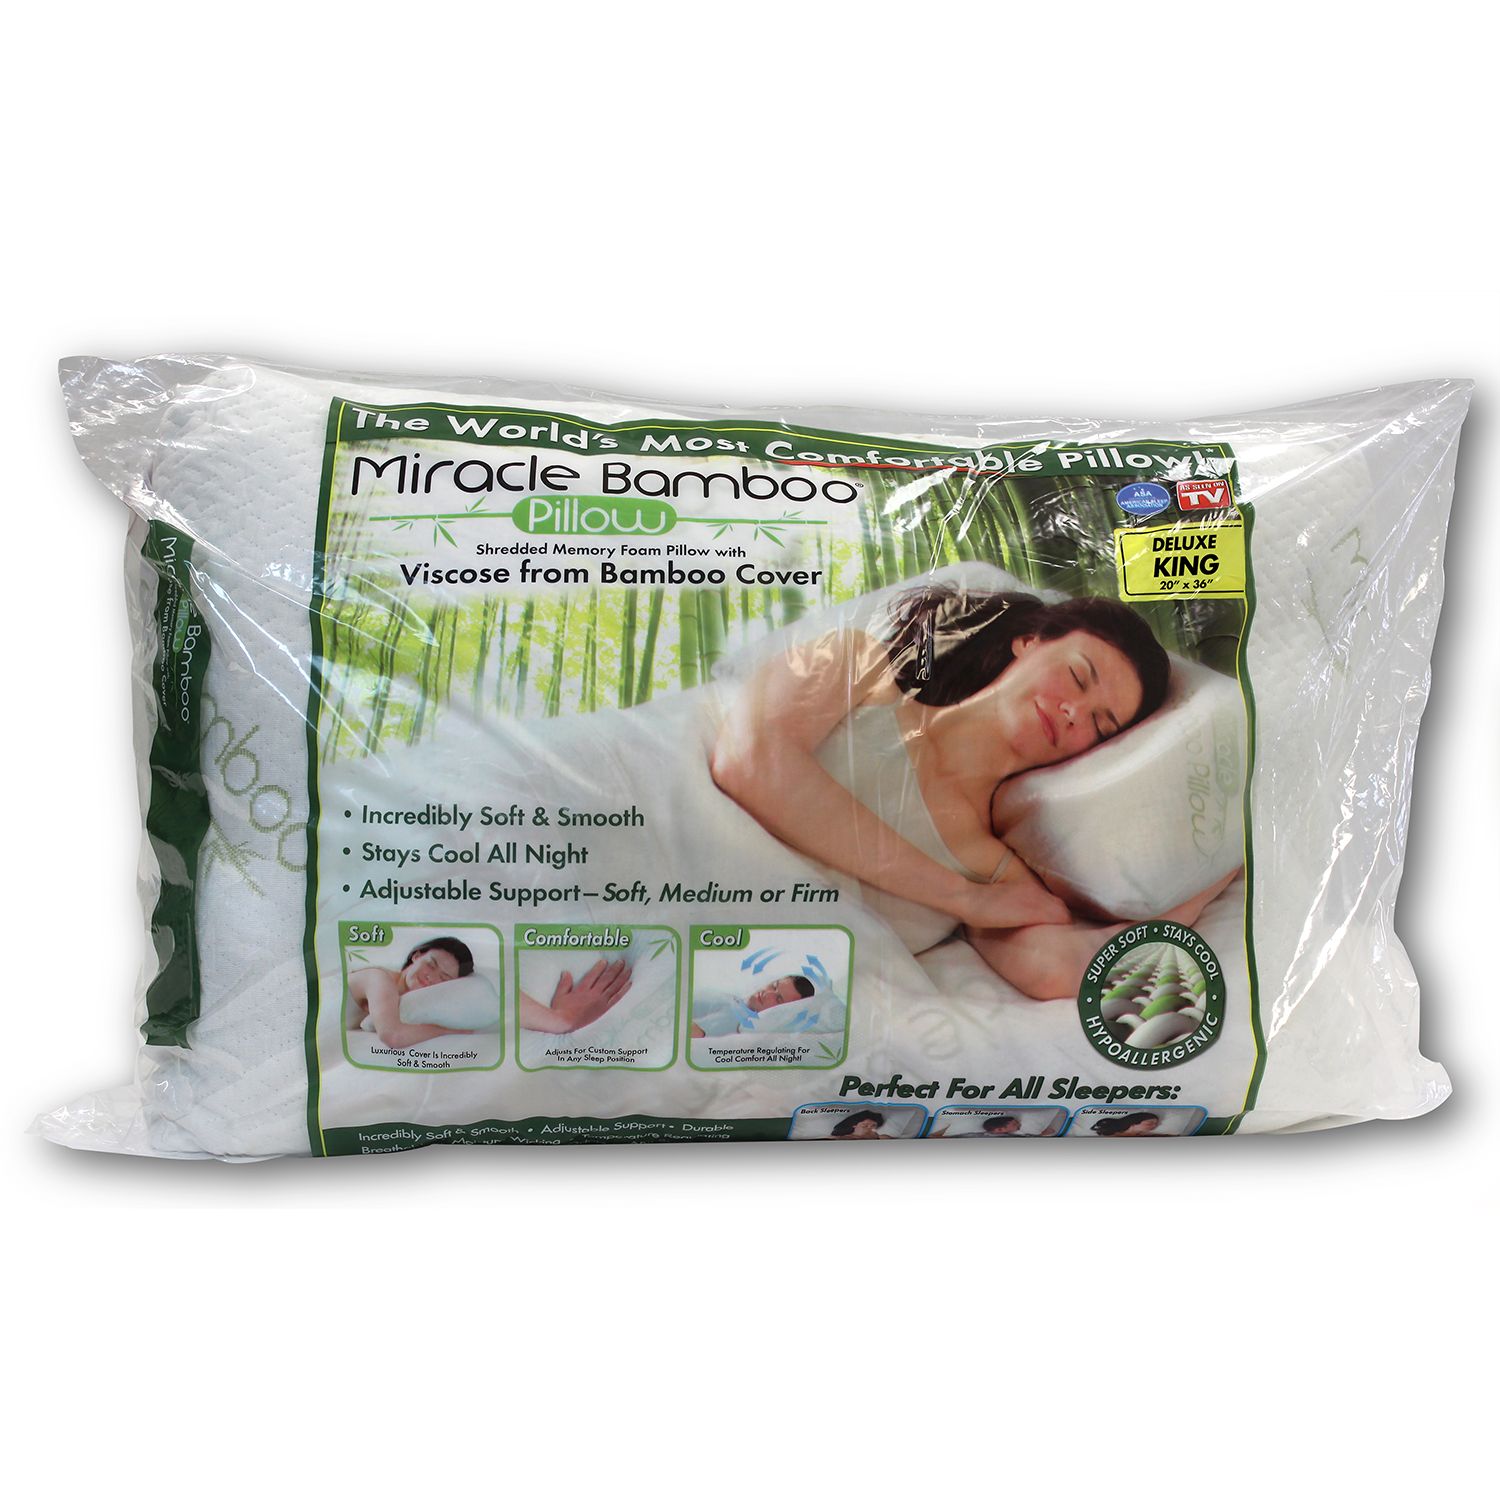 Miracle Bamboo 3-in-1 Pillow - Made 